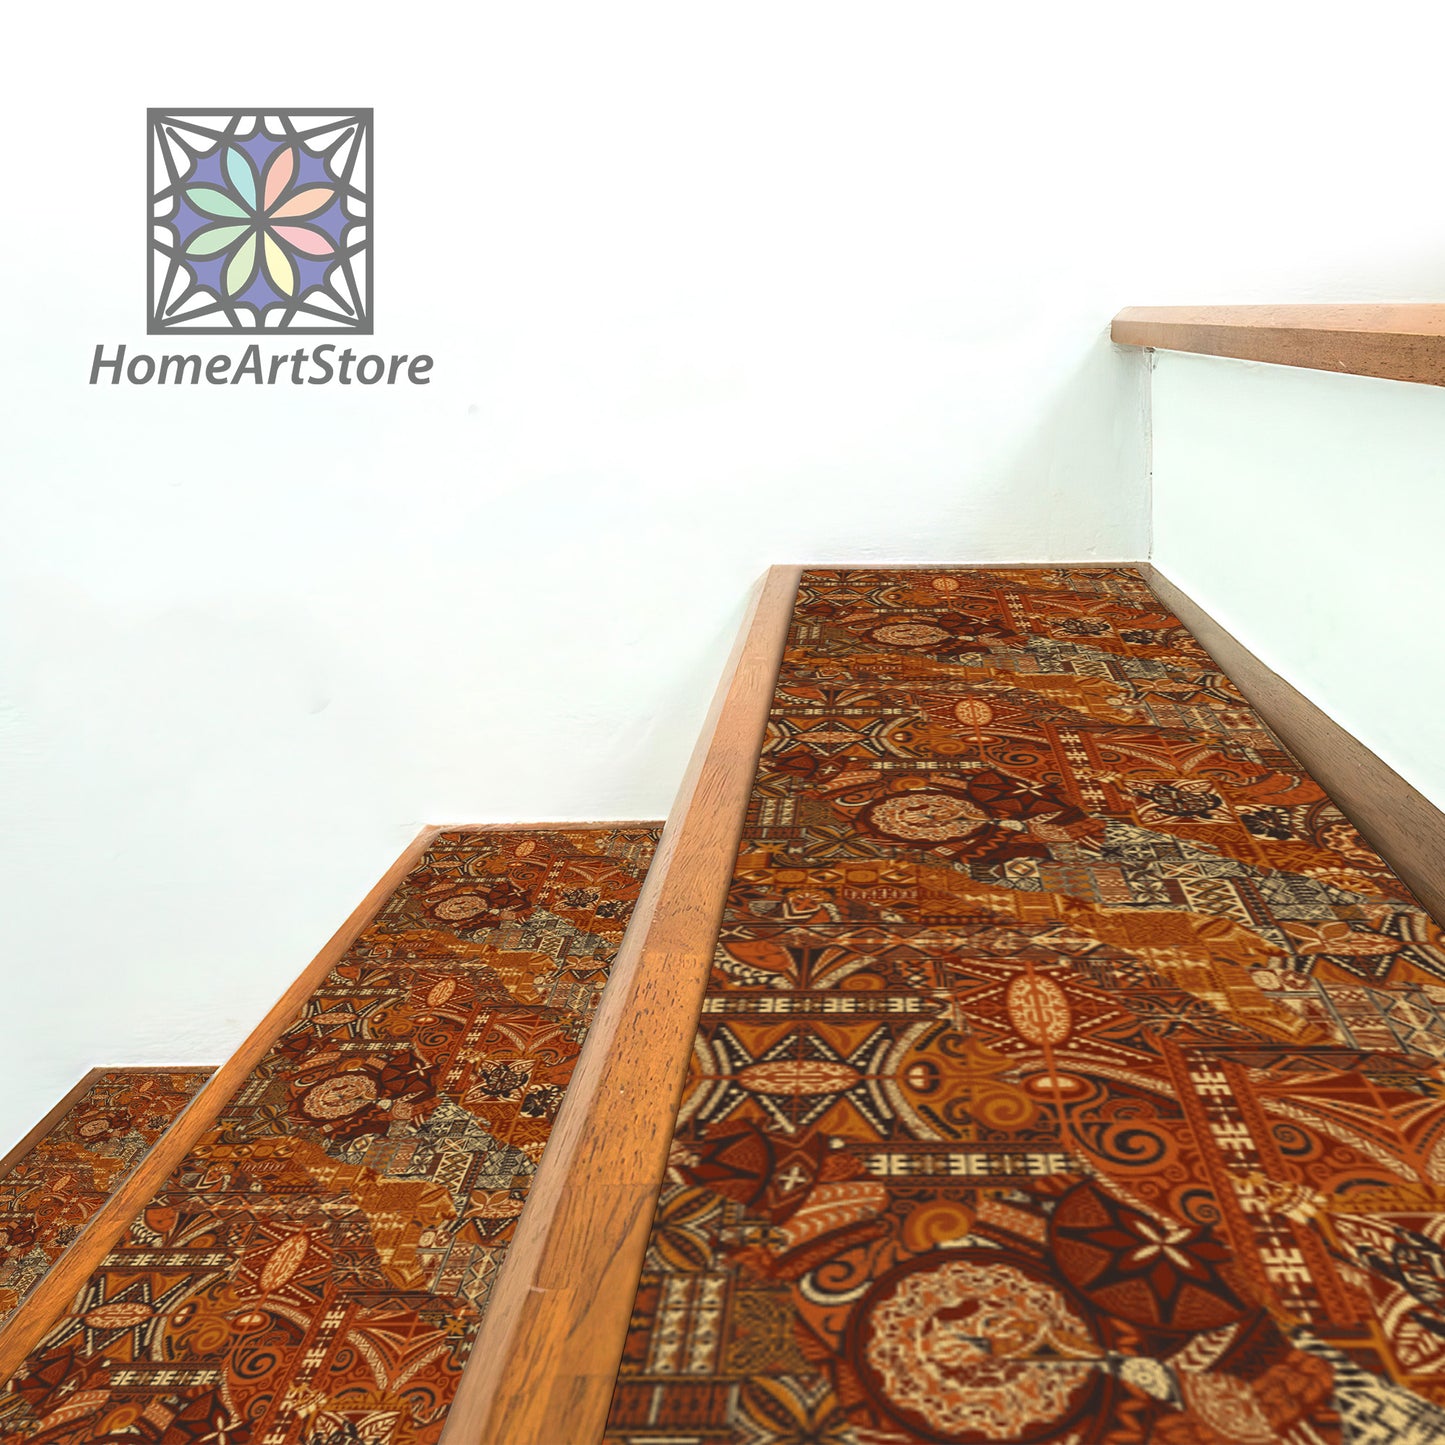 Authentic Themed Stair Rug, Patchwork Pattern Stair Tread Mats, Ethnic Stair Carpet, Tribal Decor